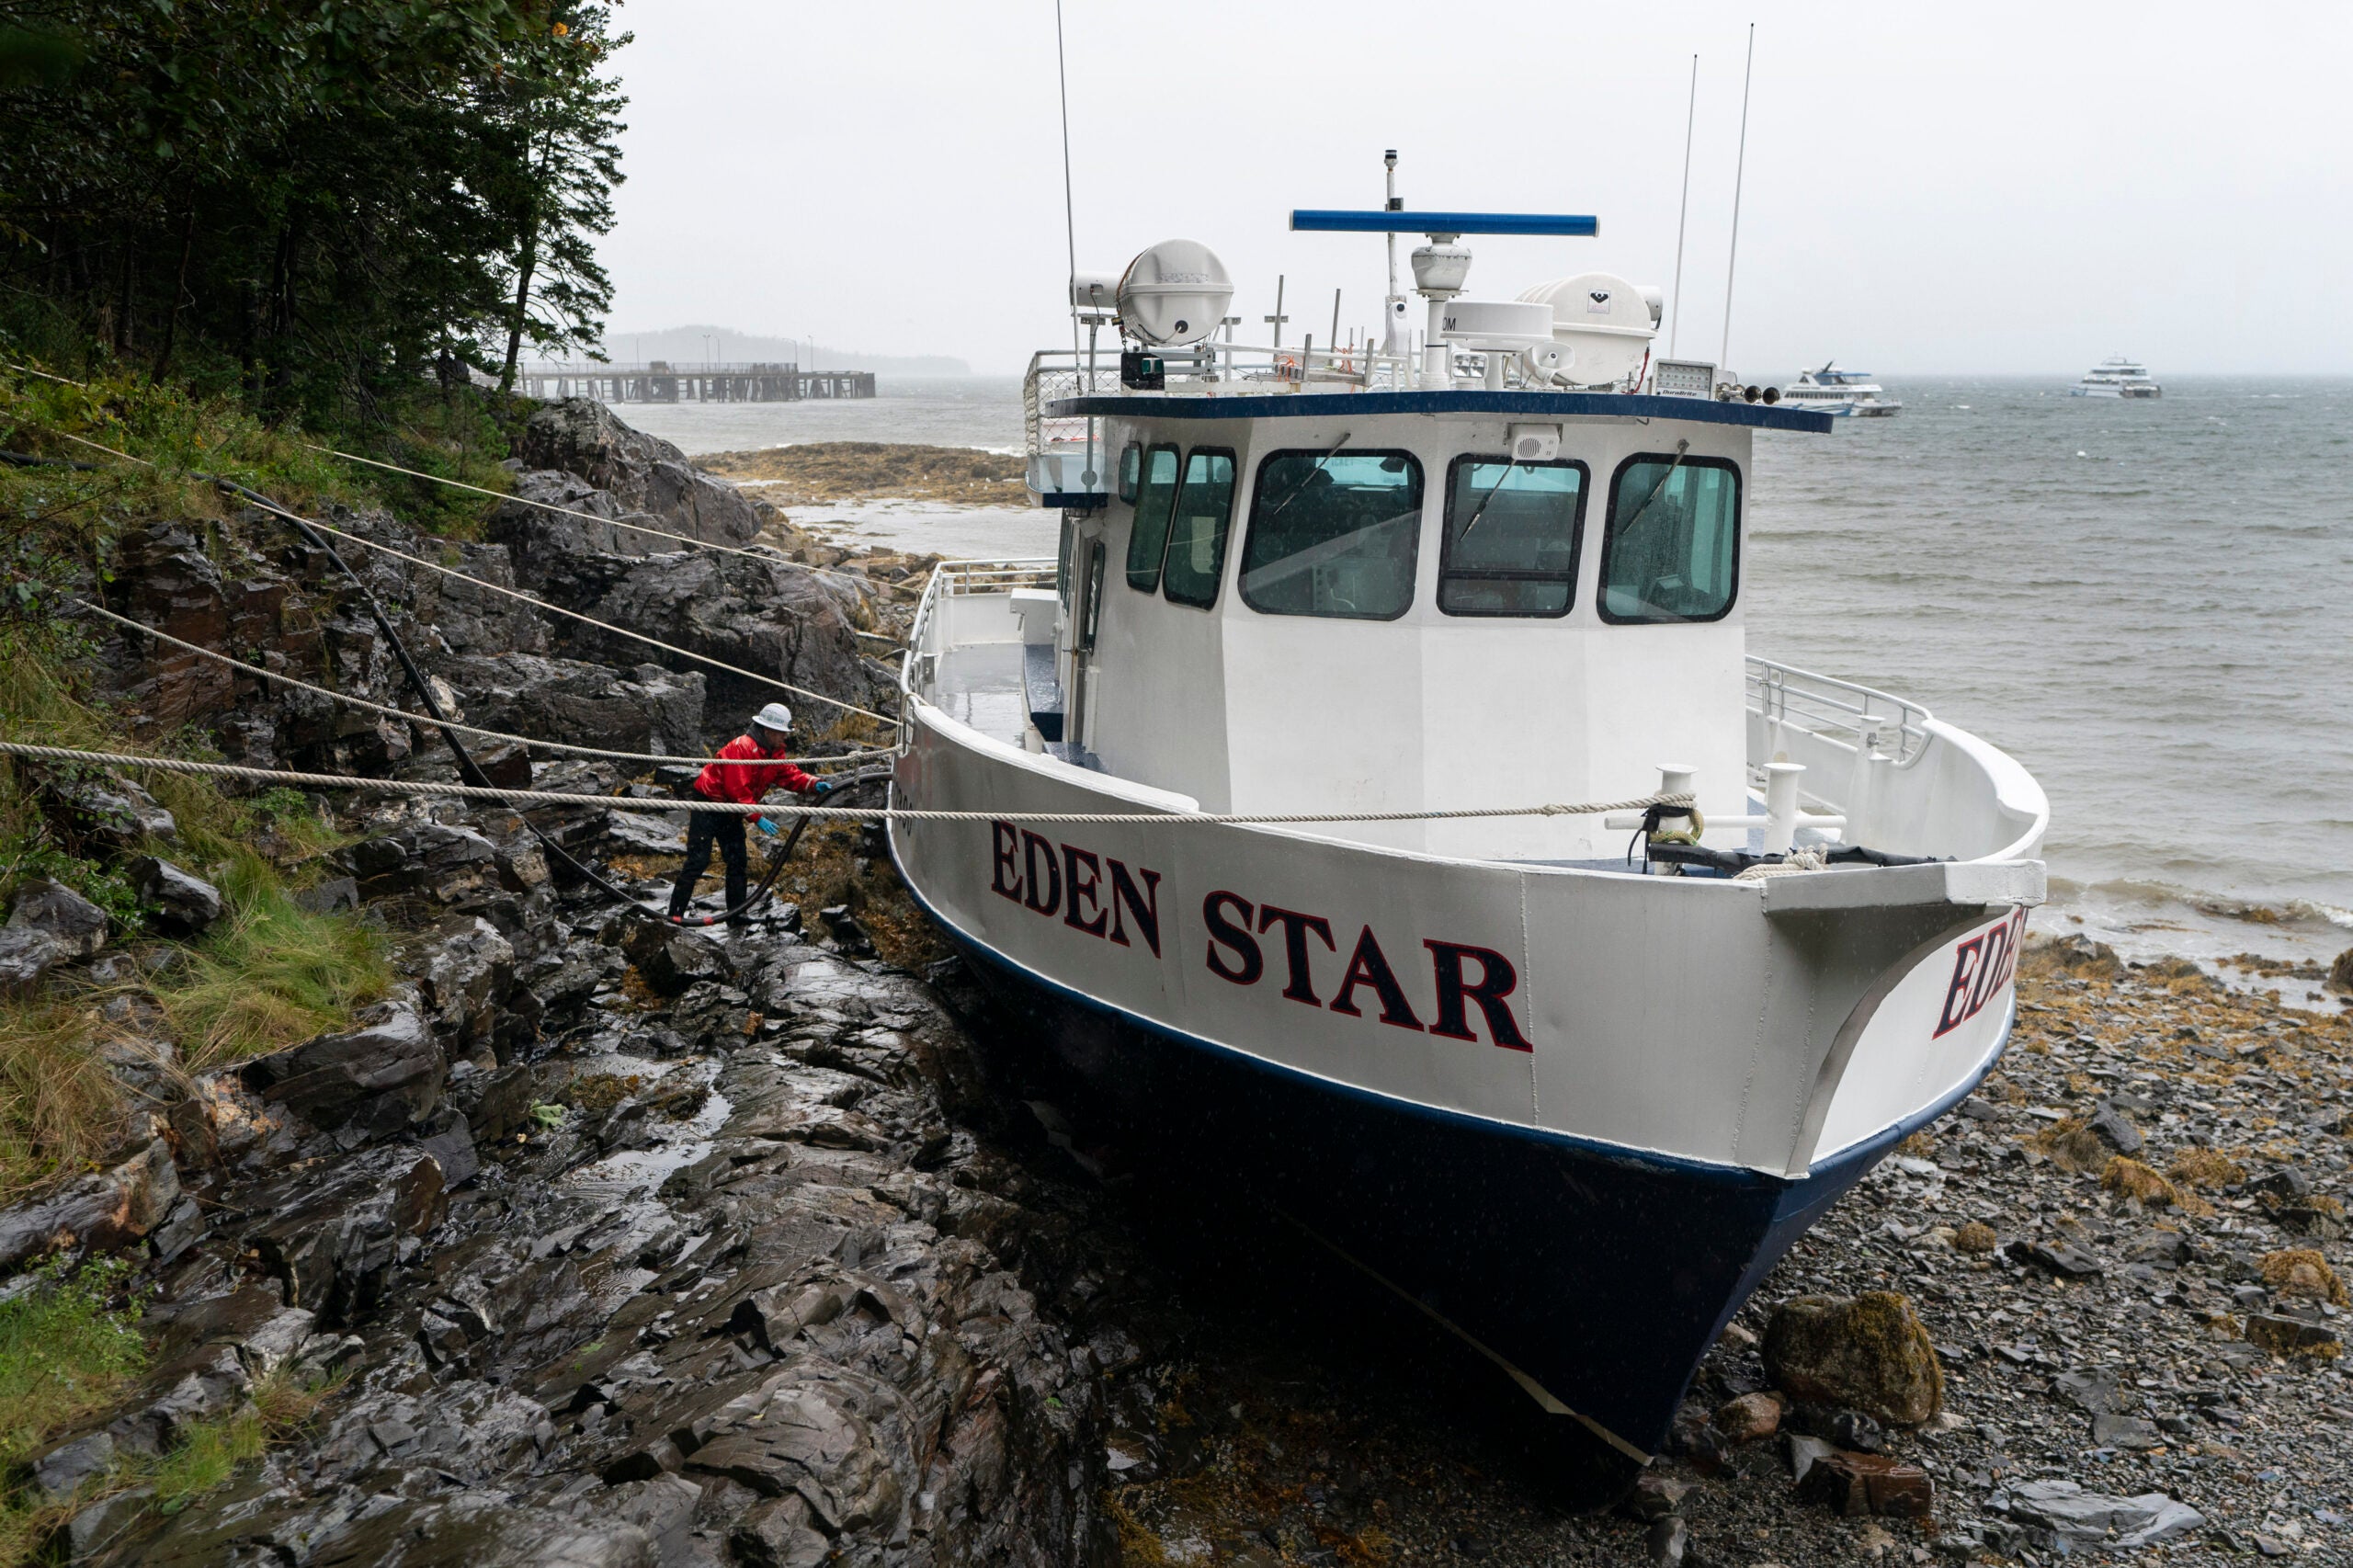 A worker prepares to unload diesel fuel from the Eden Star, a 70-foot tour boat that broke free of its mooring during storm Lee.